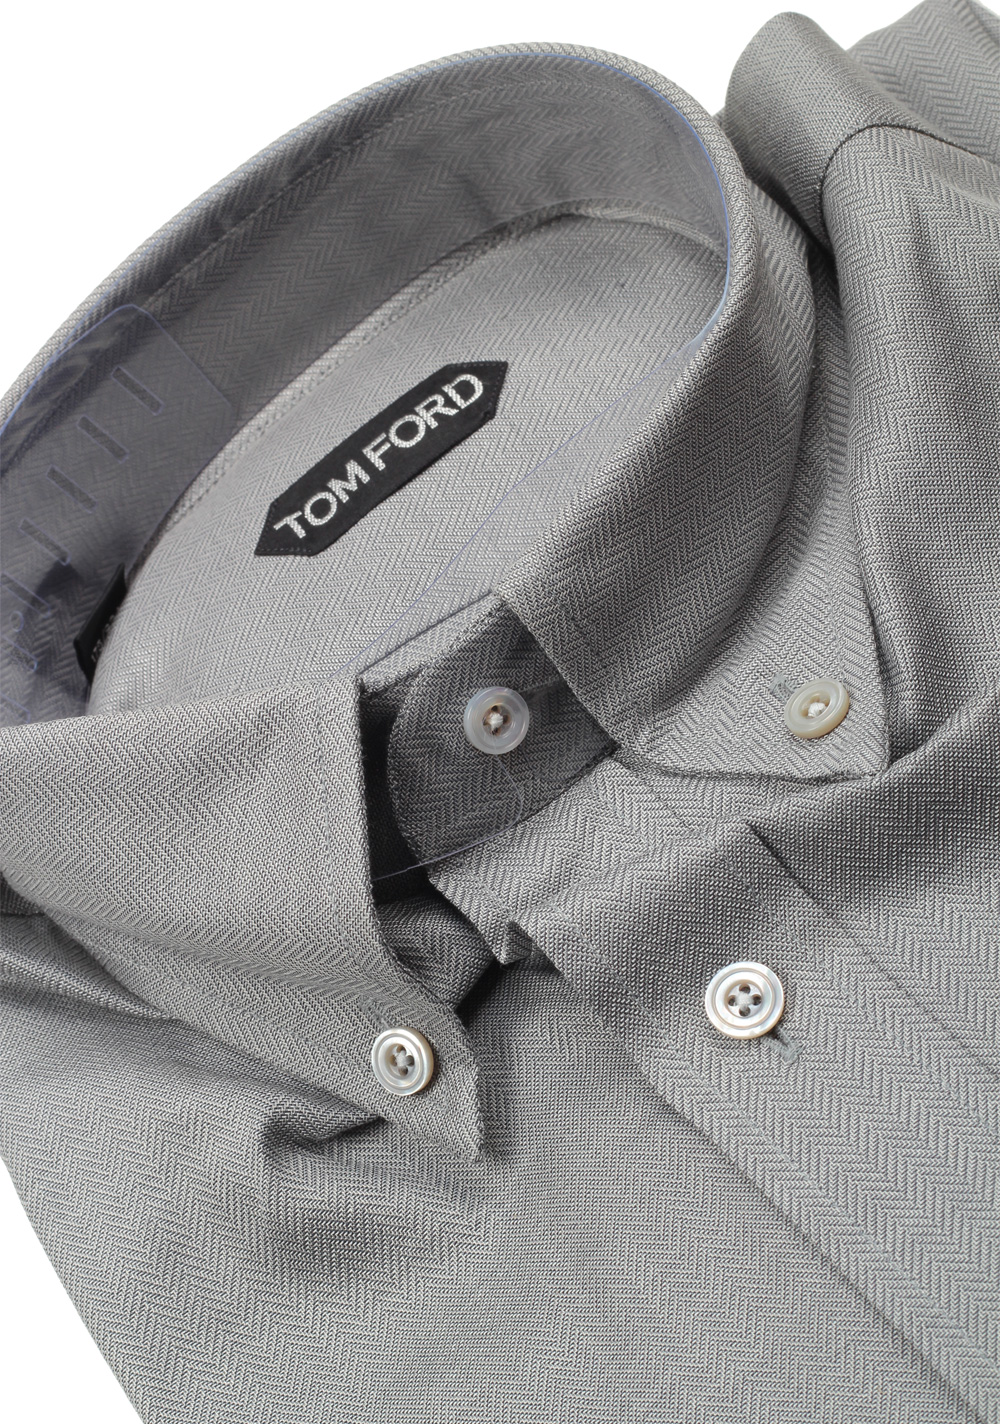 TOM FORD Solid Gray Button Down Casual Shirt Size 40 / 15,75 U.S. | Costume Limité